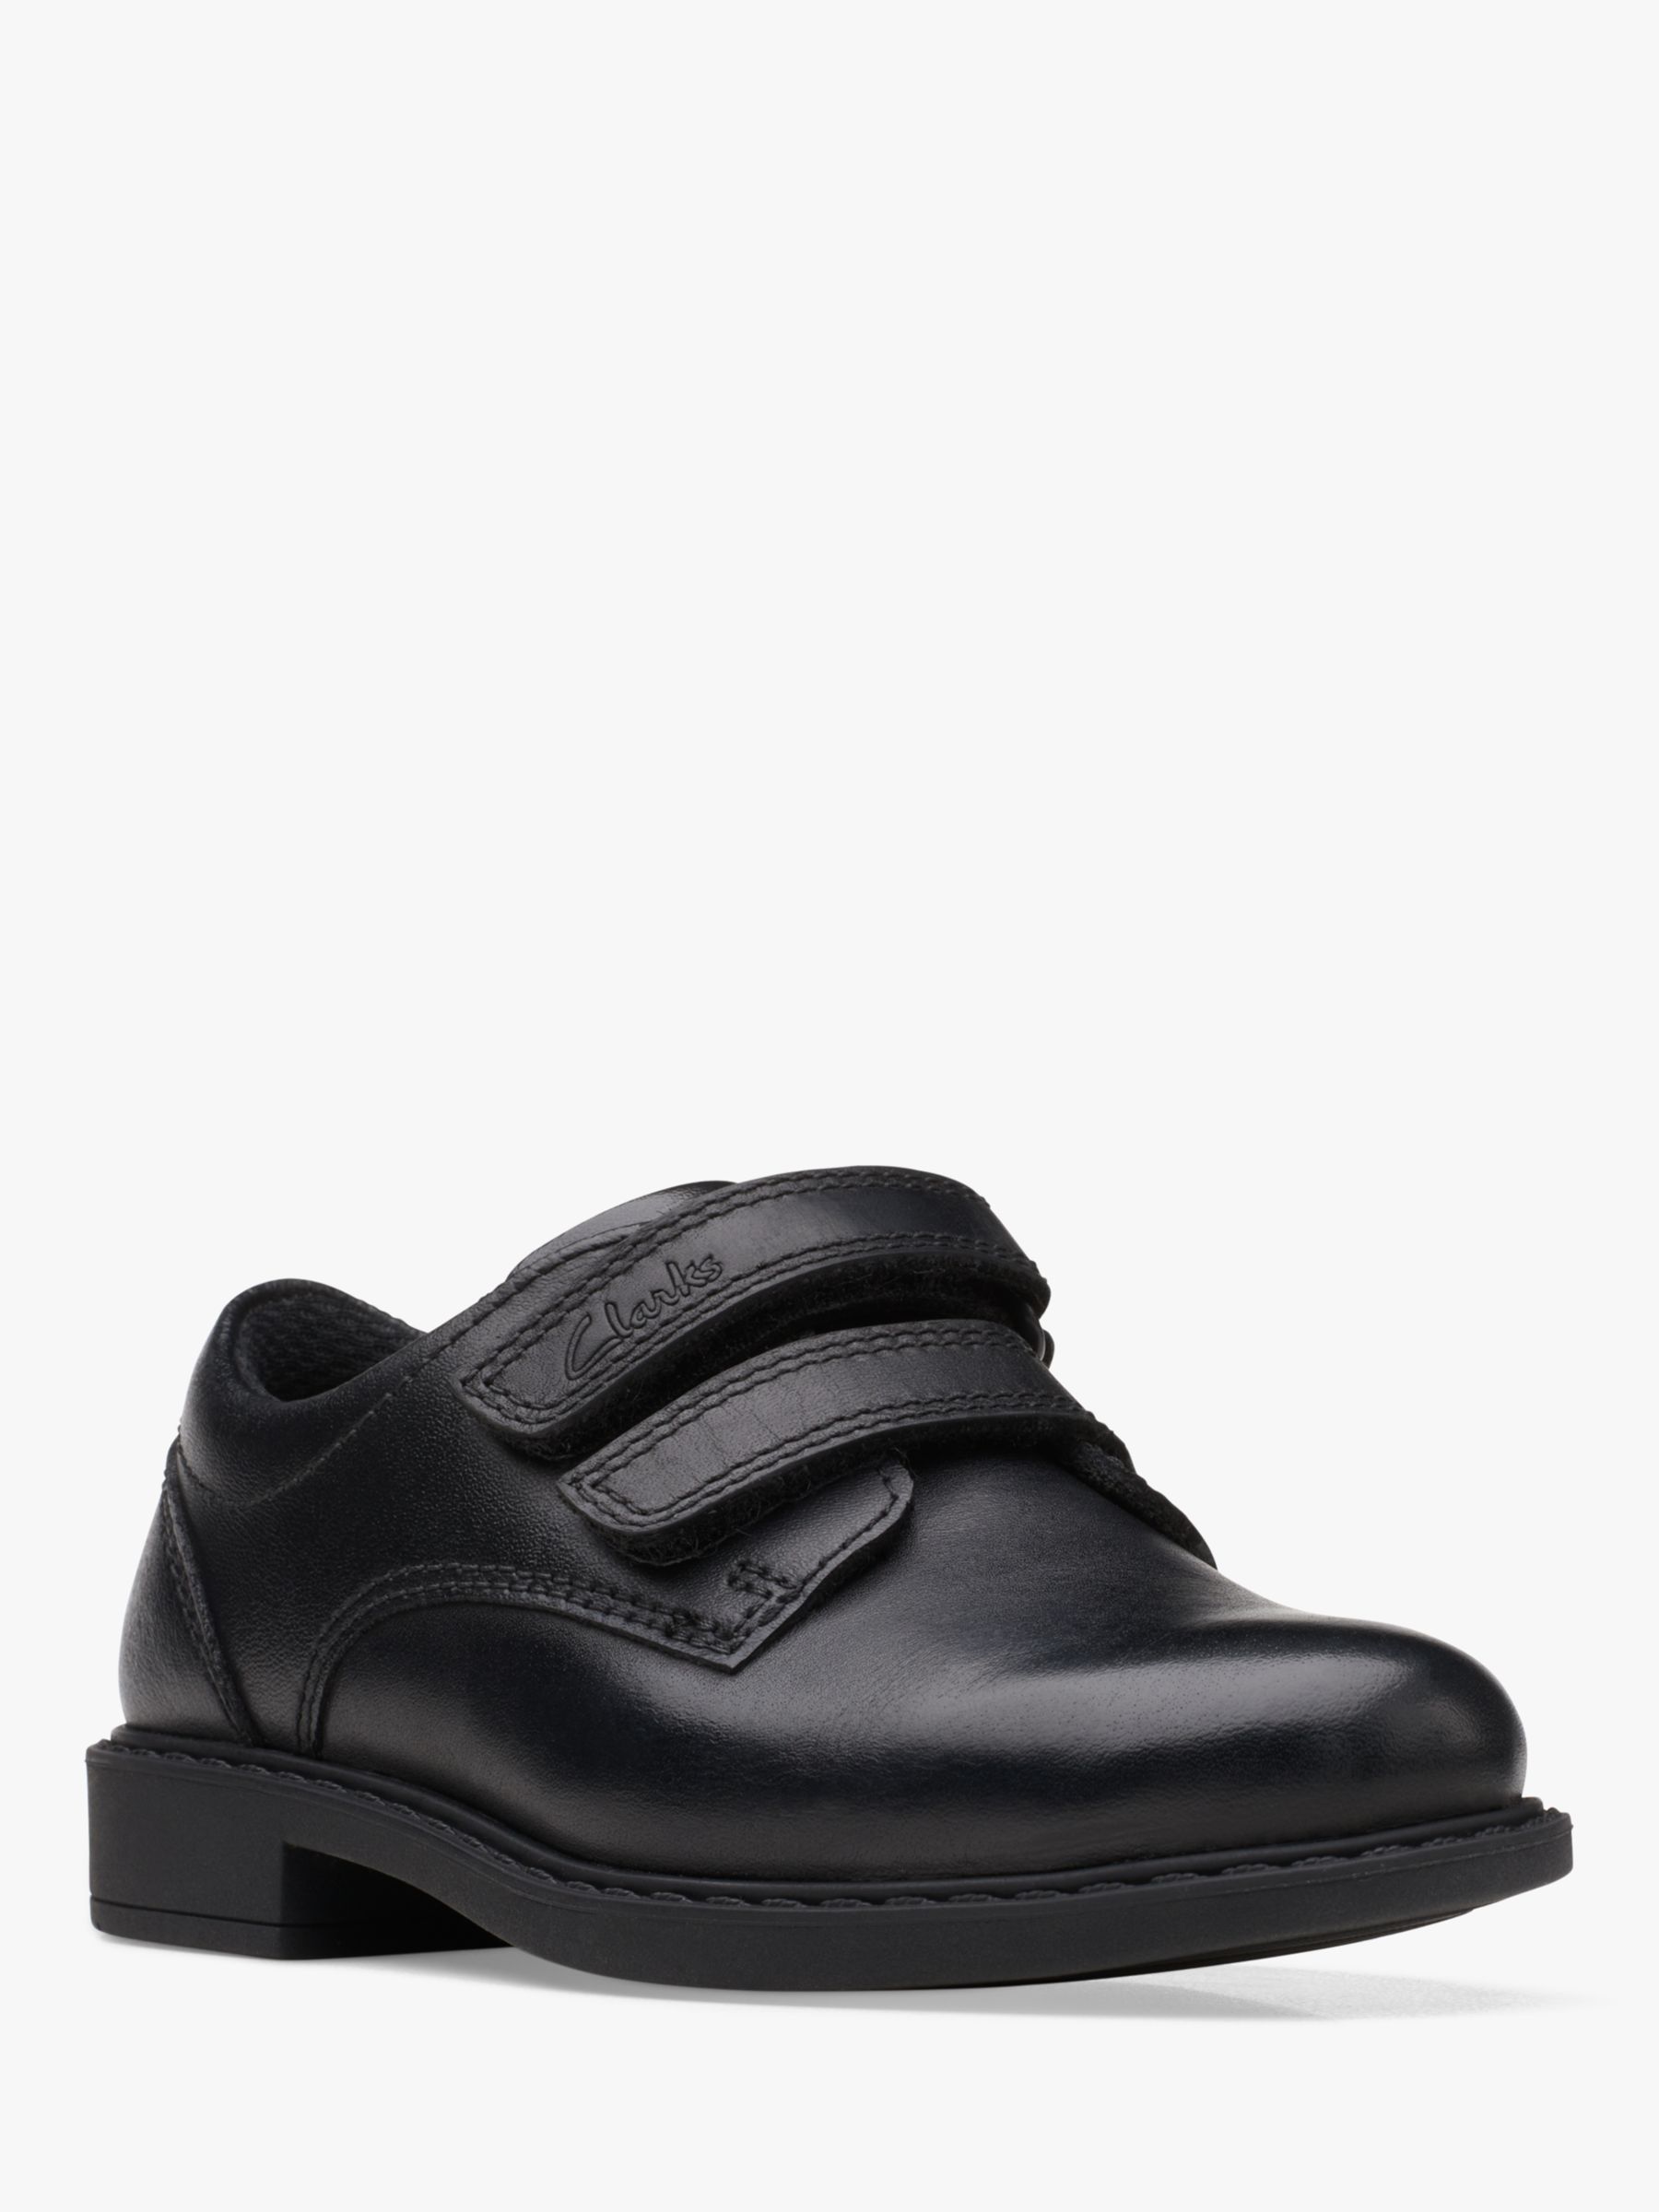 Buy Clarks Kids' Scala Pace School Shoes Online at johnlewis.com